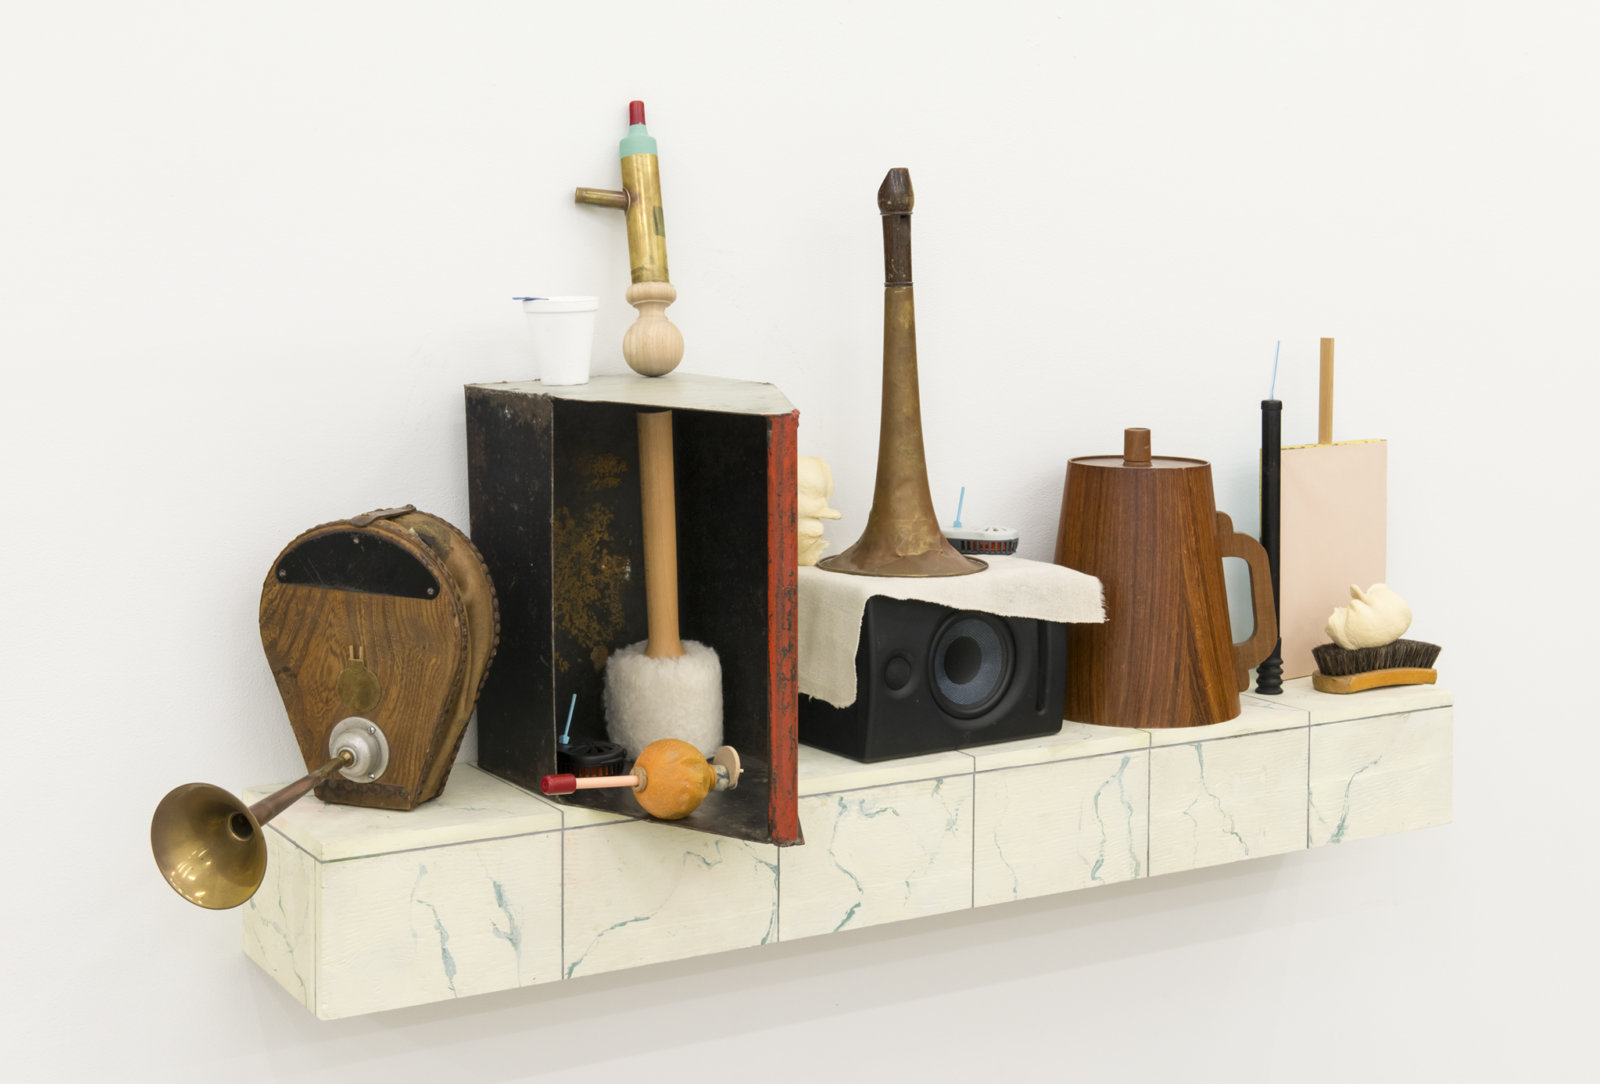 Ashes Withyman, Furnas, Compass, Altar, Musca, River, Cetus, Cup, 2017–2018, tool box, styrofoam cup, mallet, brass horn, bullae, mosquito repelling devices, shoe brush, paper, wood, brass, animal call parts, musical instrument parts, pump, speaker, painted plywood, 34 x 63 x 14 in. (86 x 160 x 34 cm)